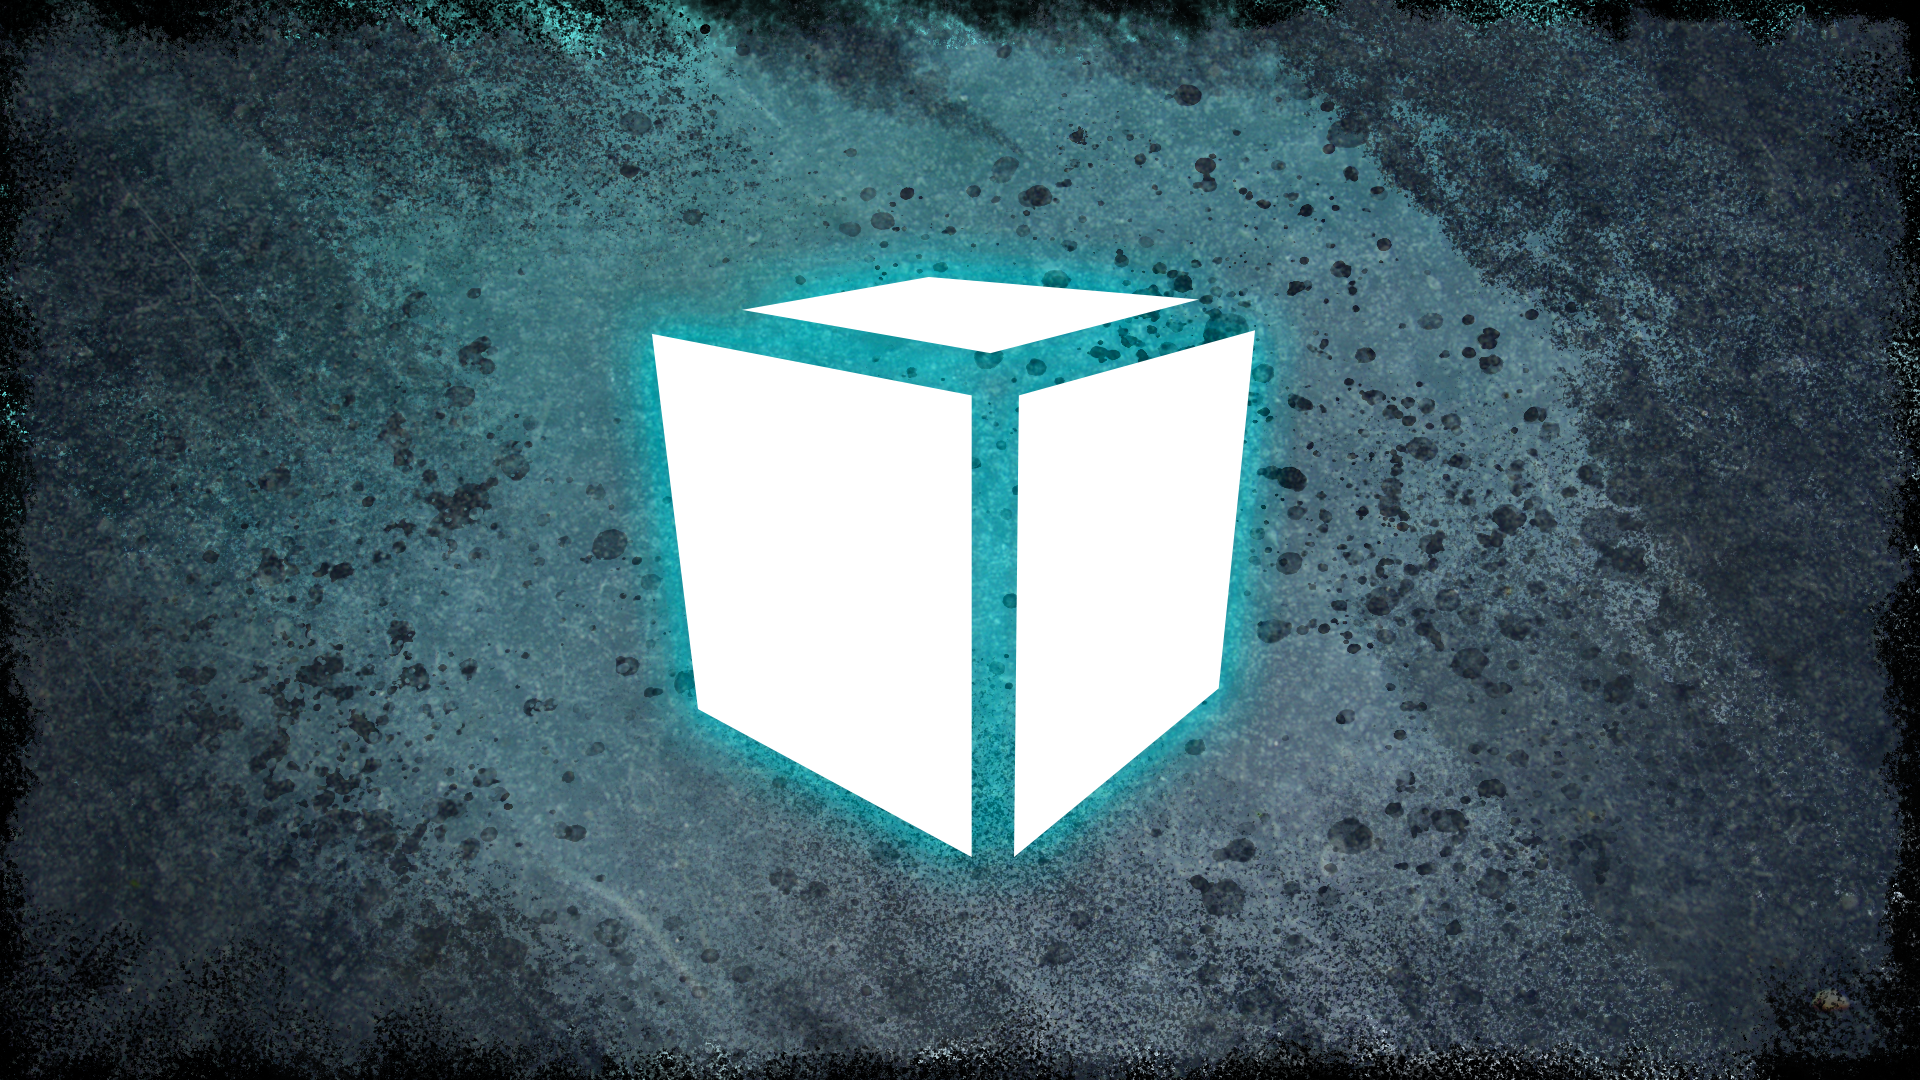 Icon for Not a Cube